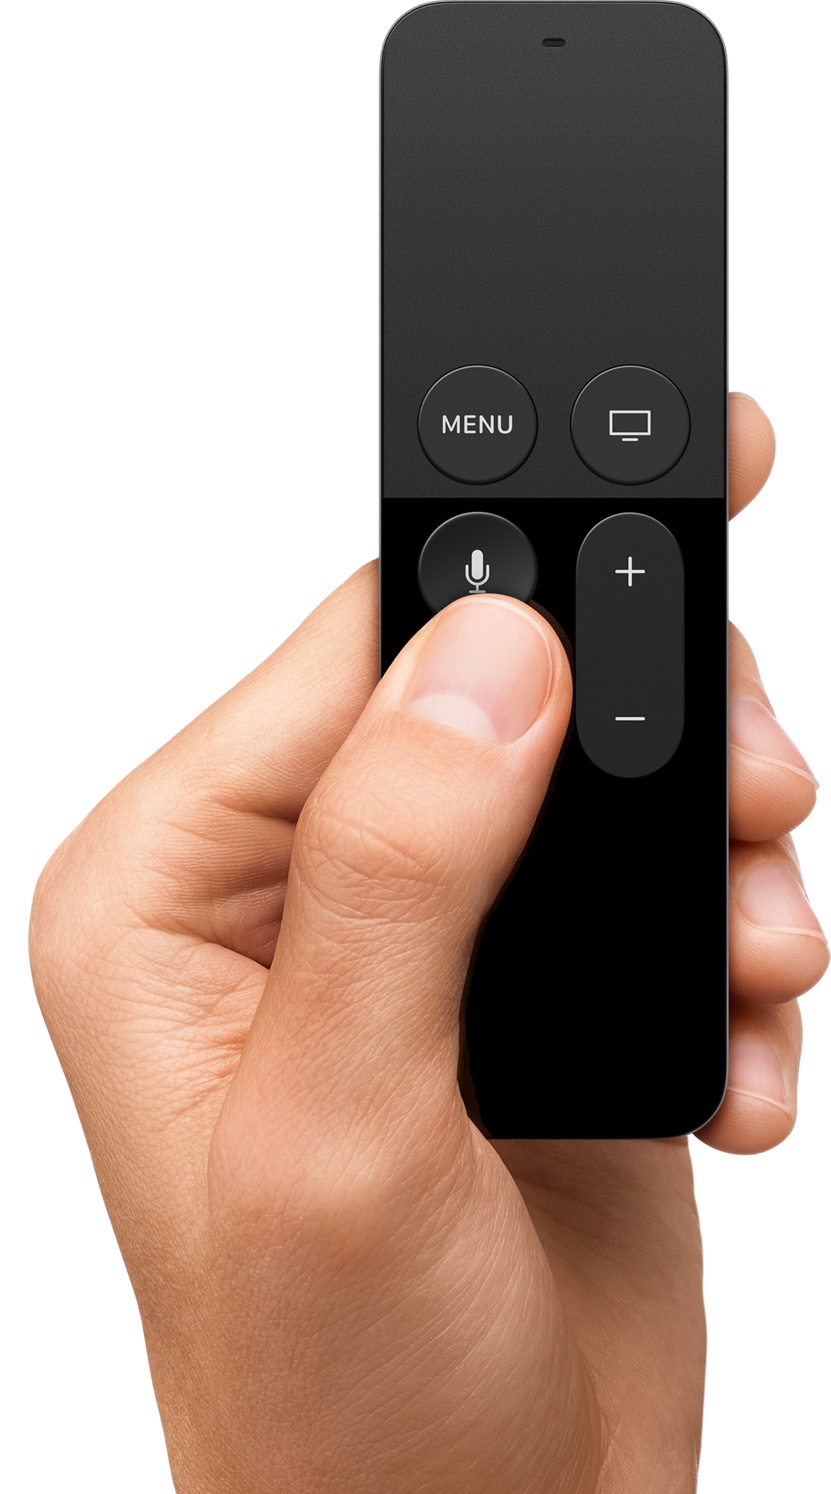 Apple-TV-4-remote-in-hand-image-002